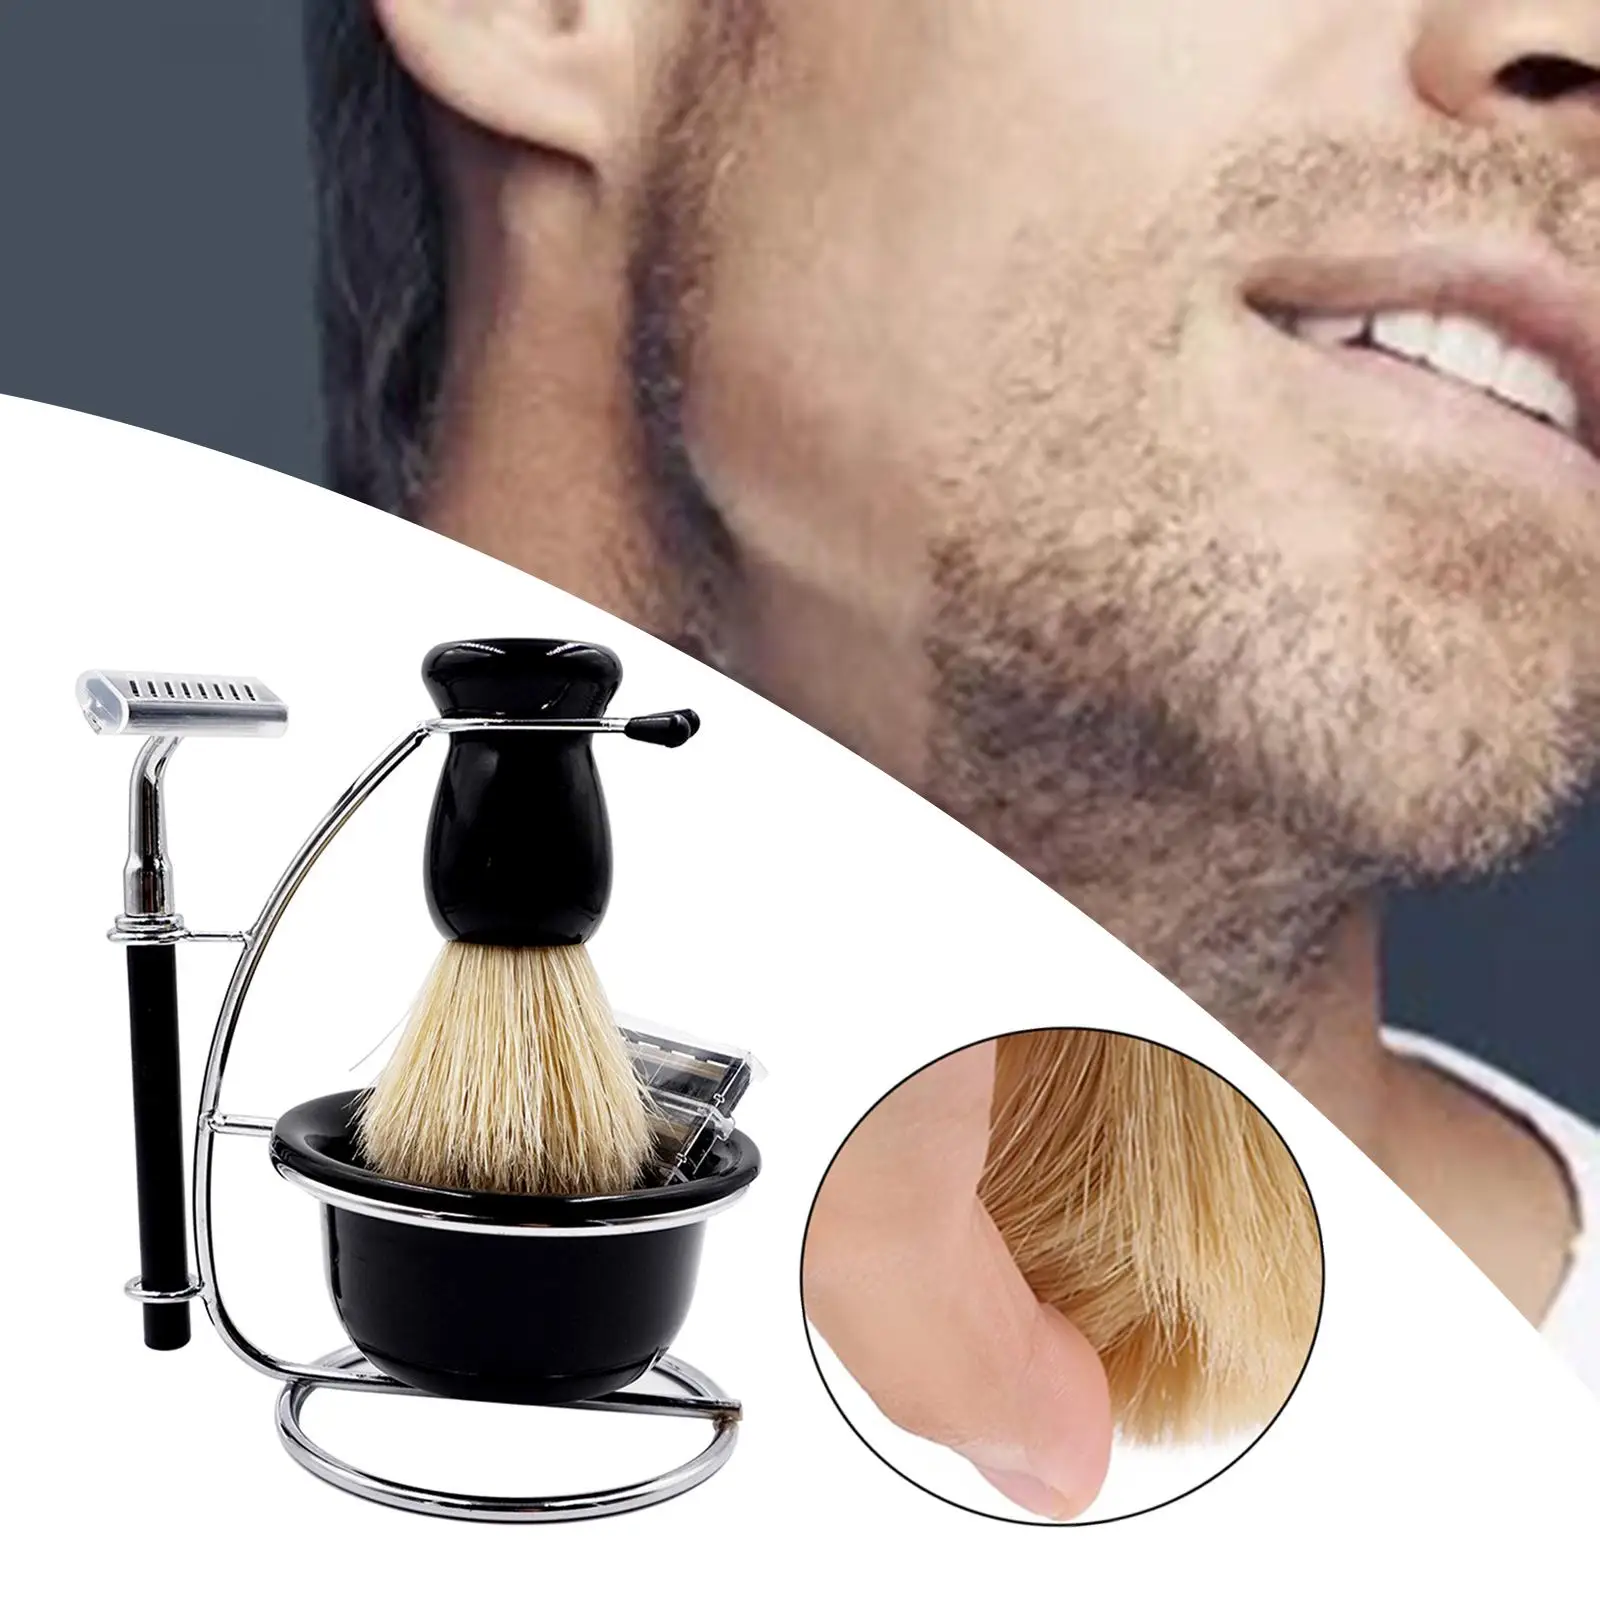 Men Shaving Set Manual Stand Brush Bowl Set Accessory Professional Sturdy Elegant Durable Weighted Bottom Solid Portable